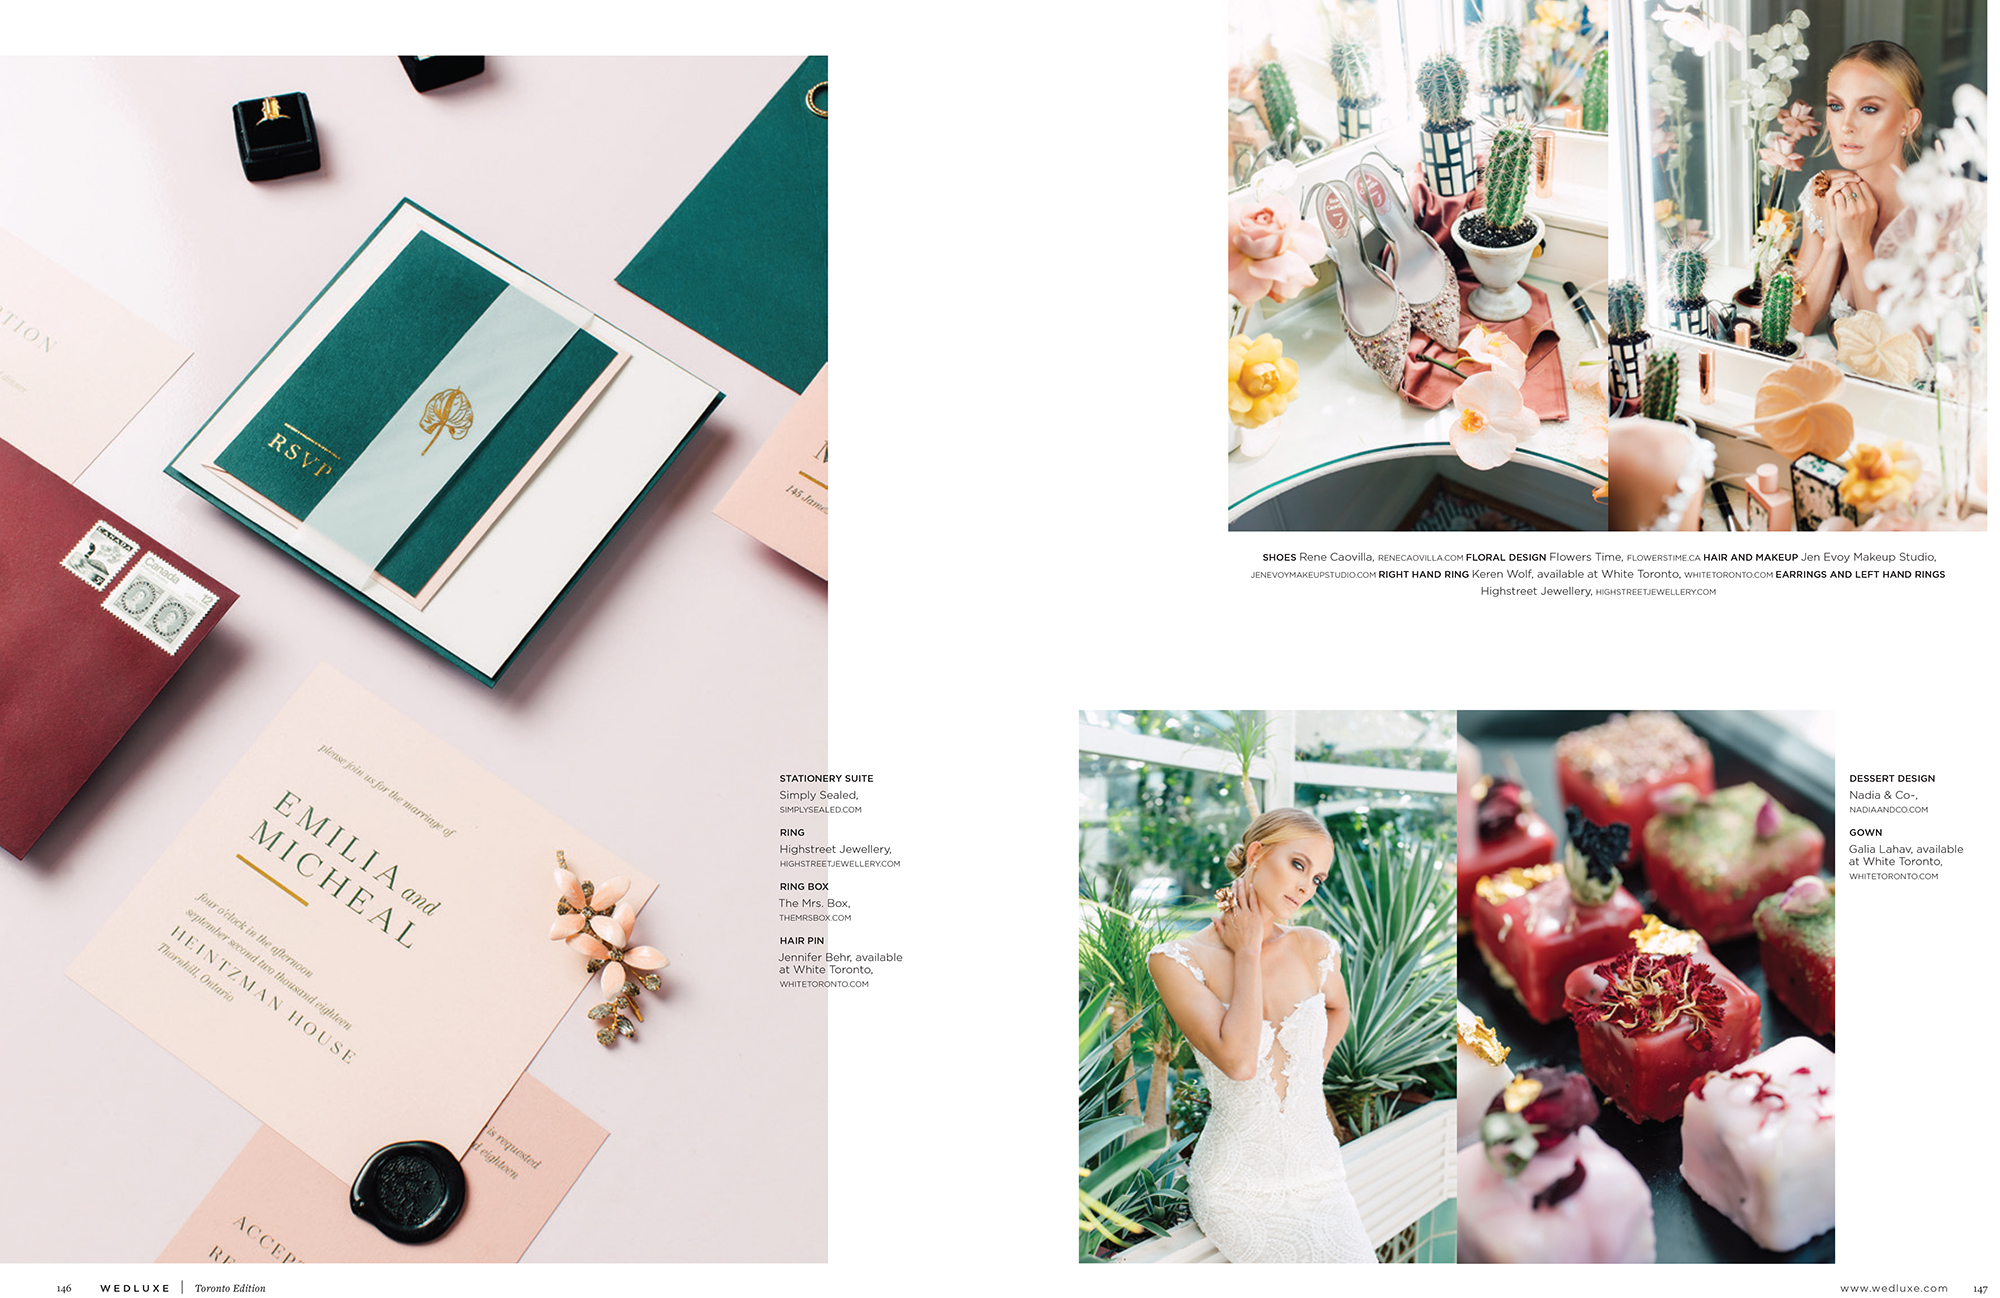 Published by Wedluxe